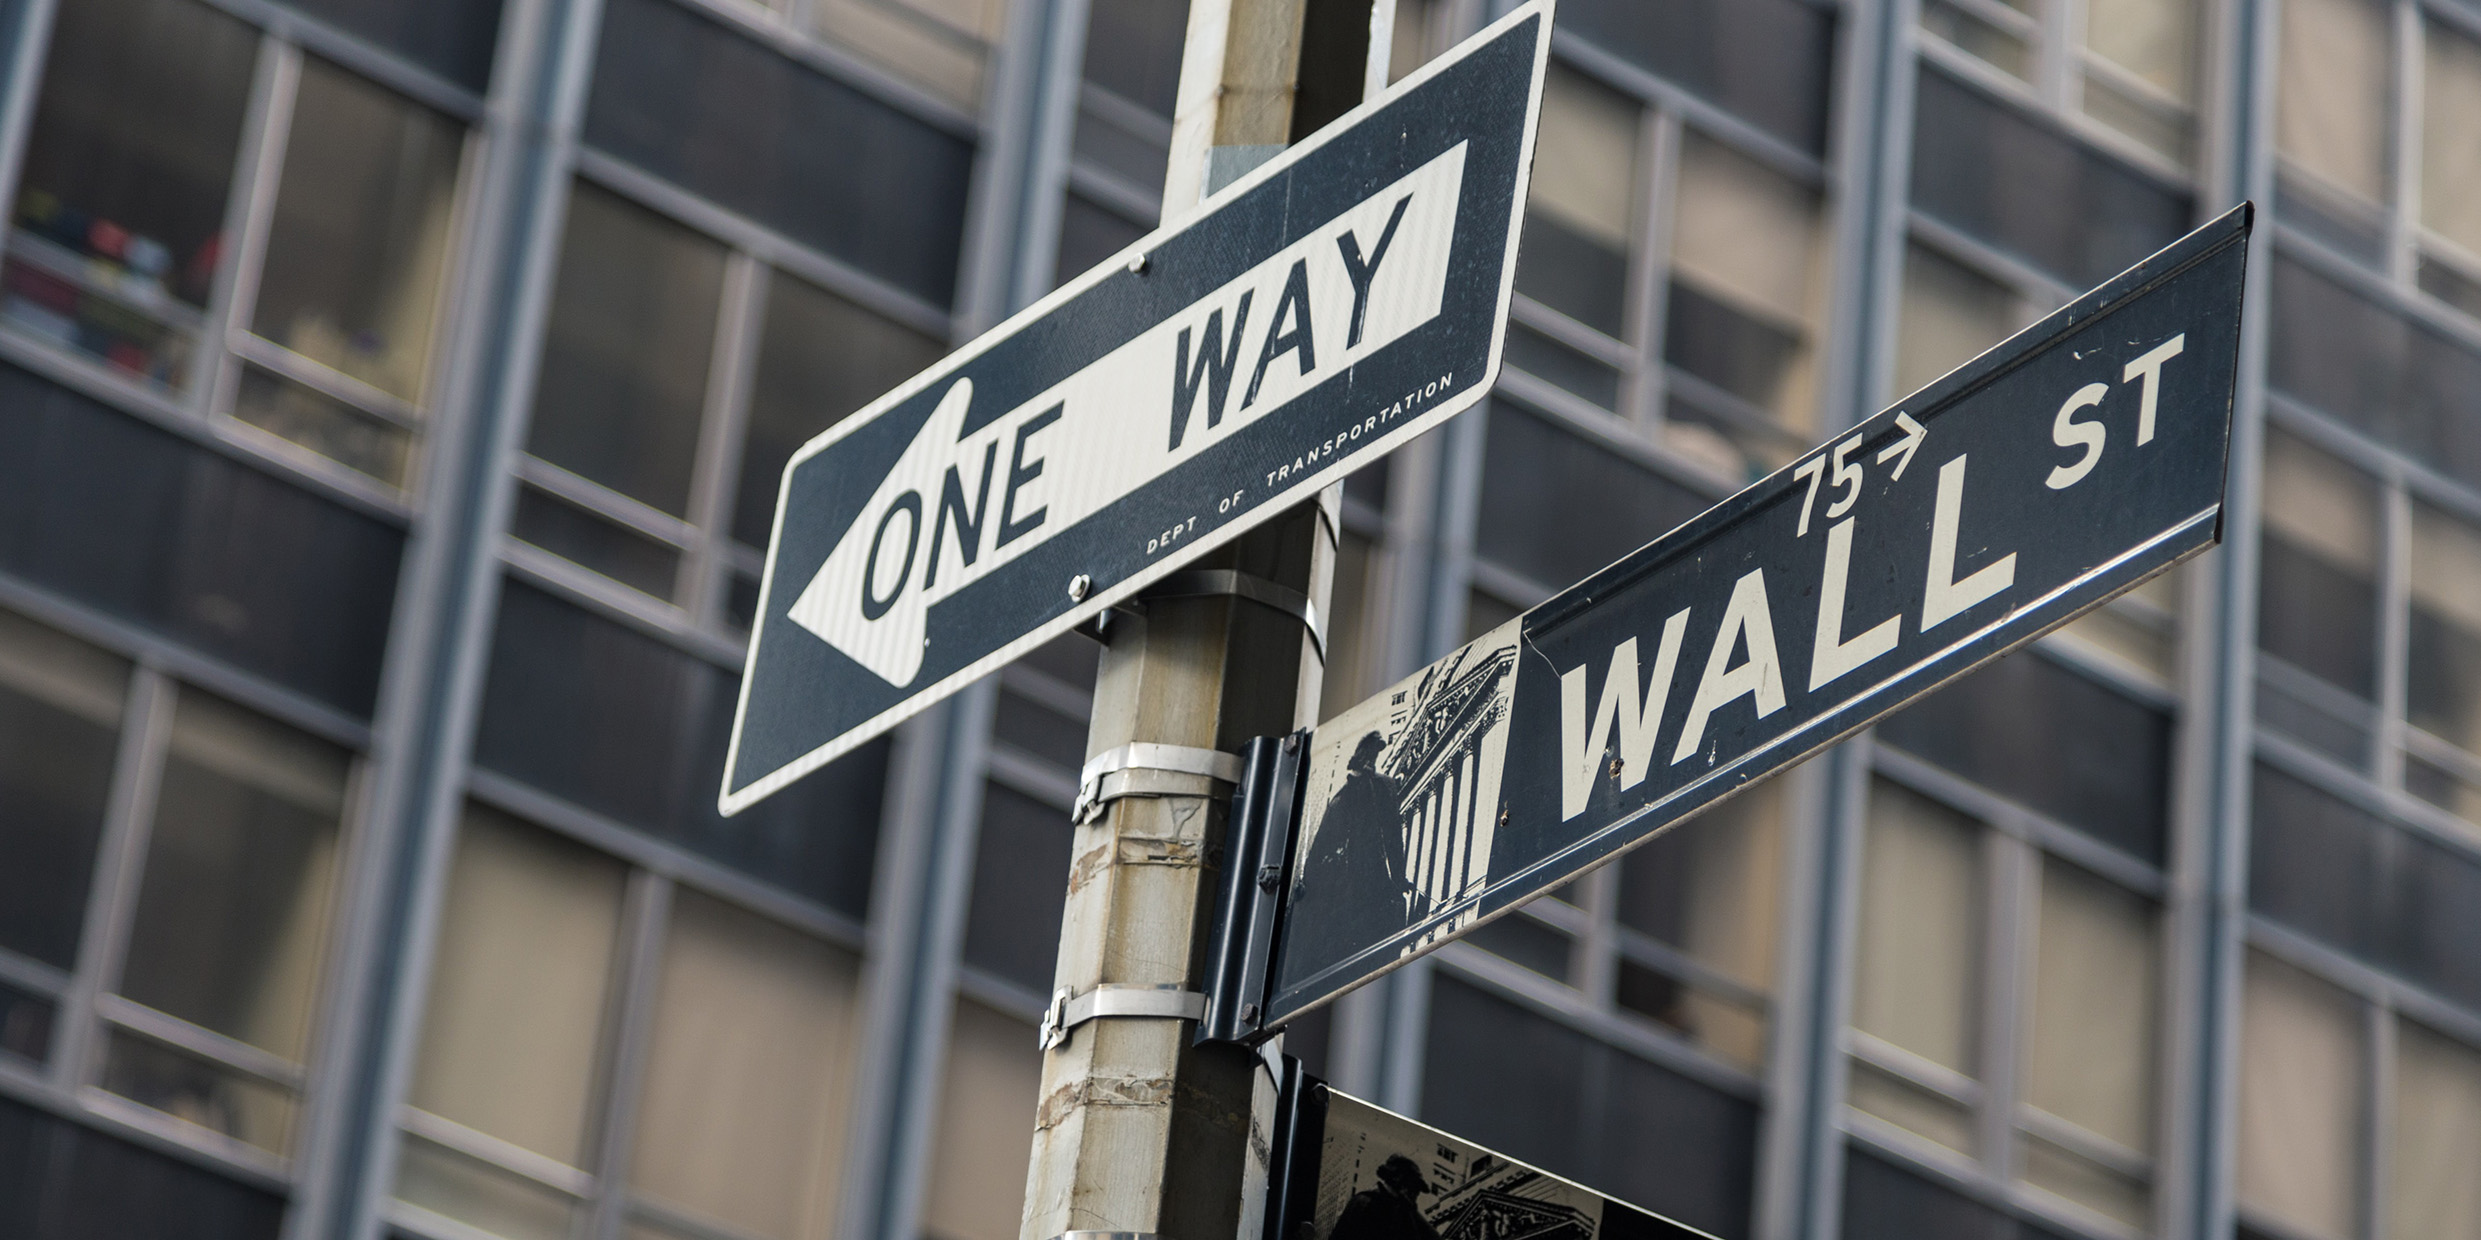 Image of street sign on Wall Street in New York